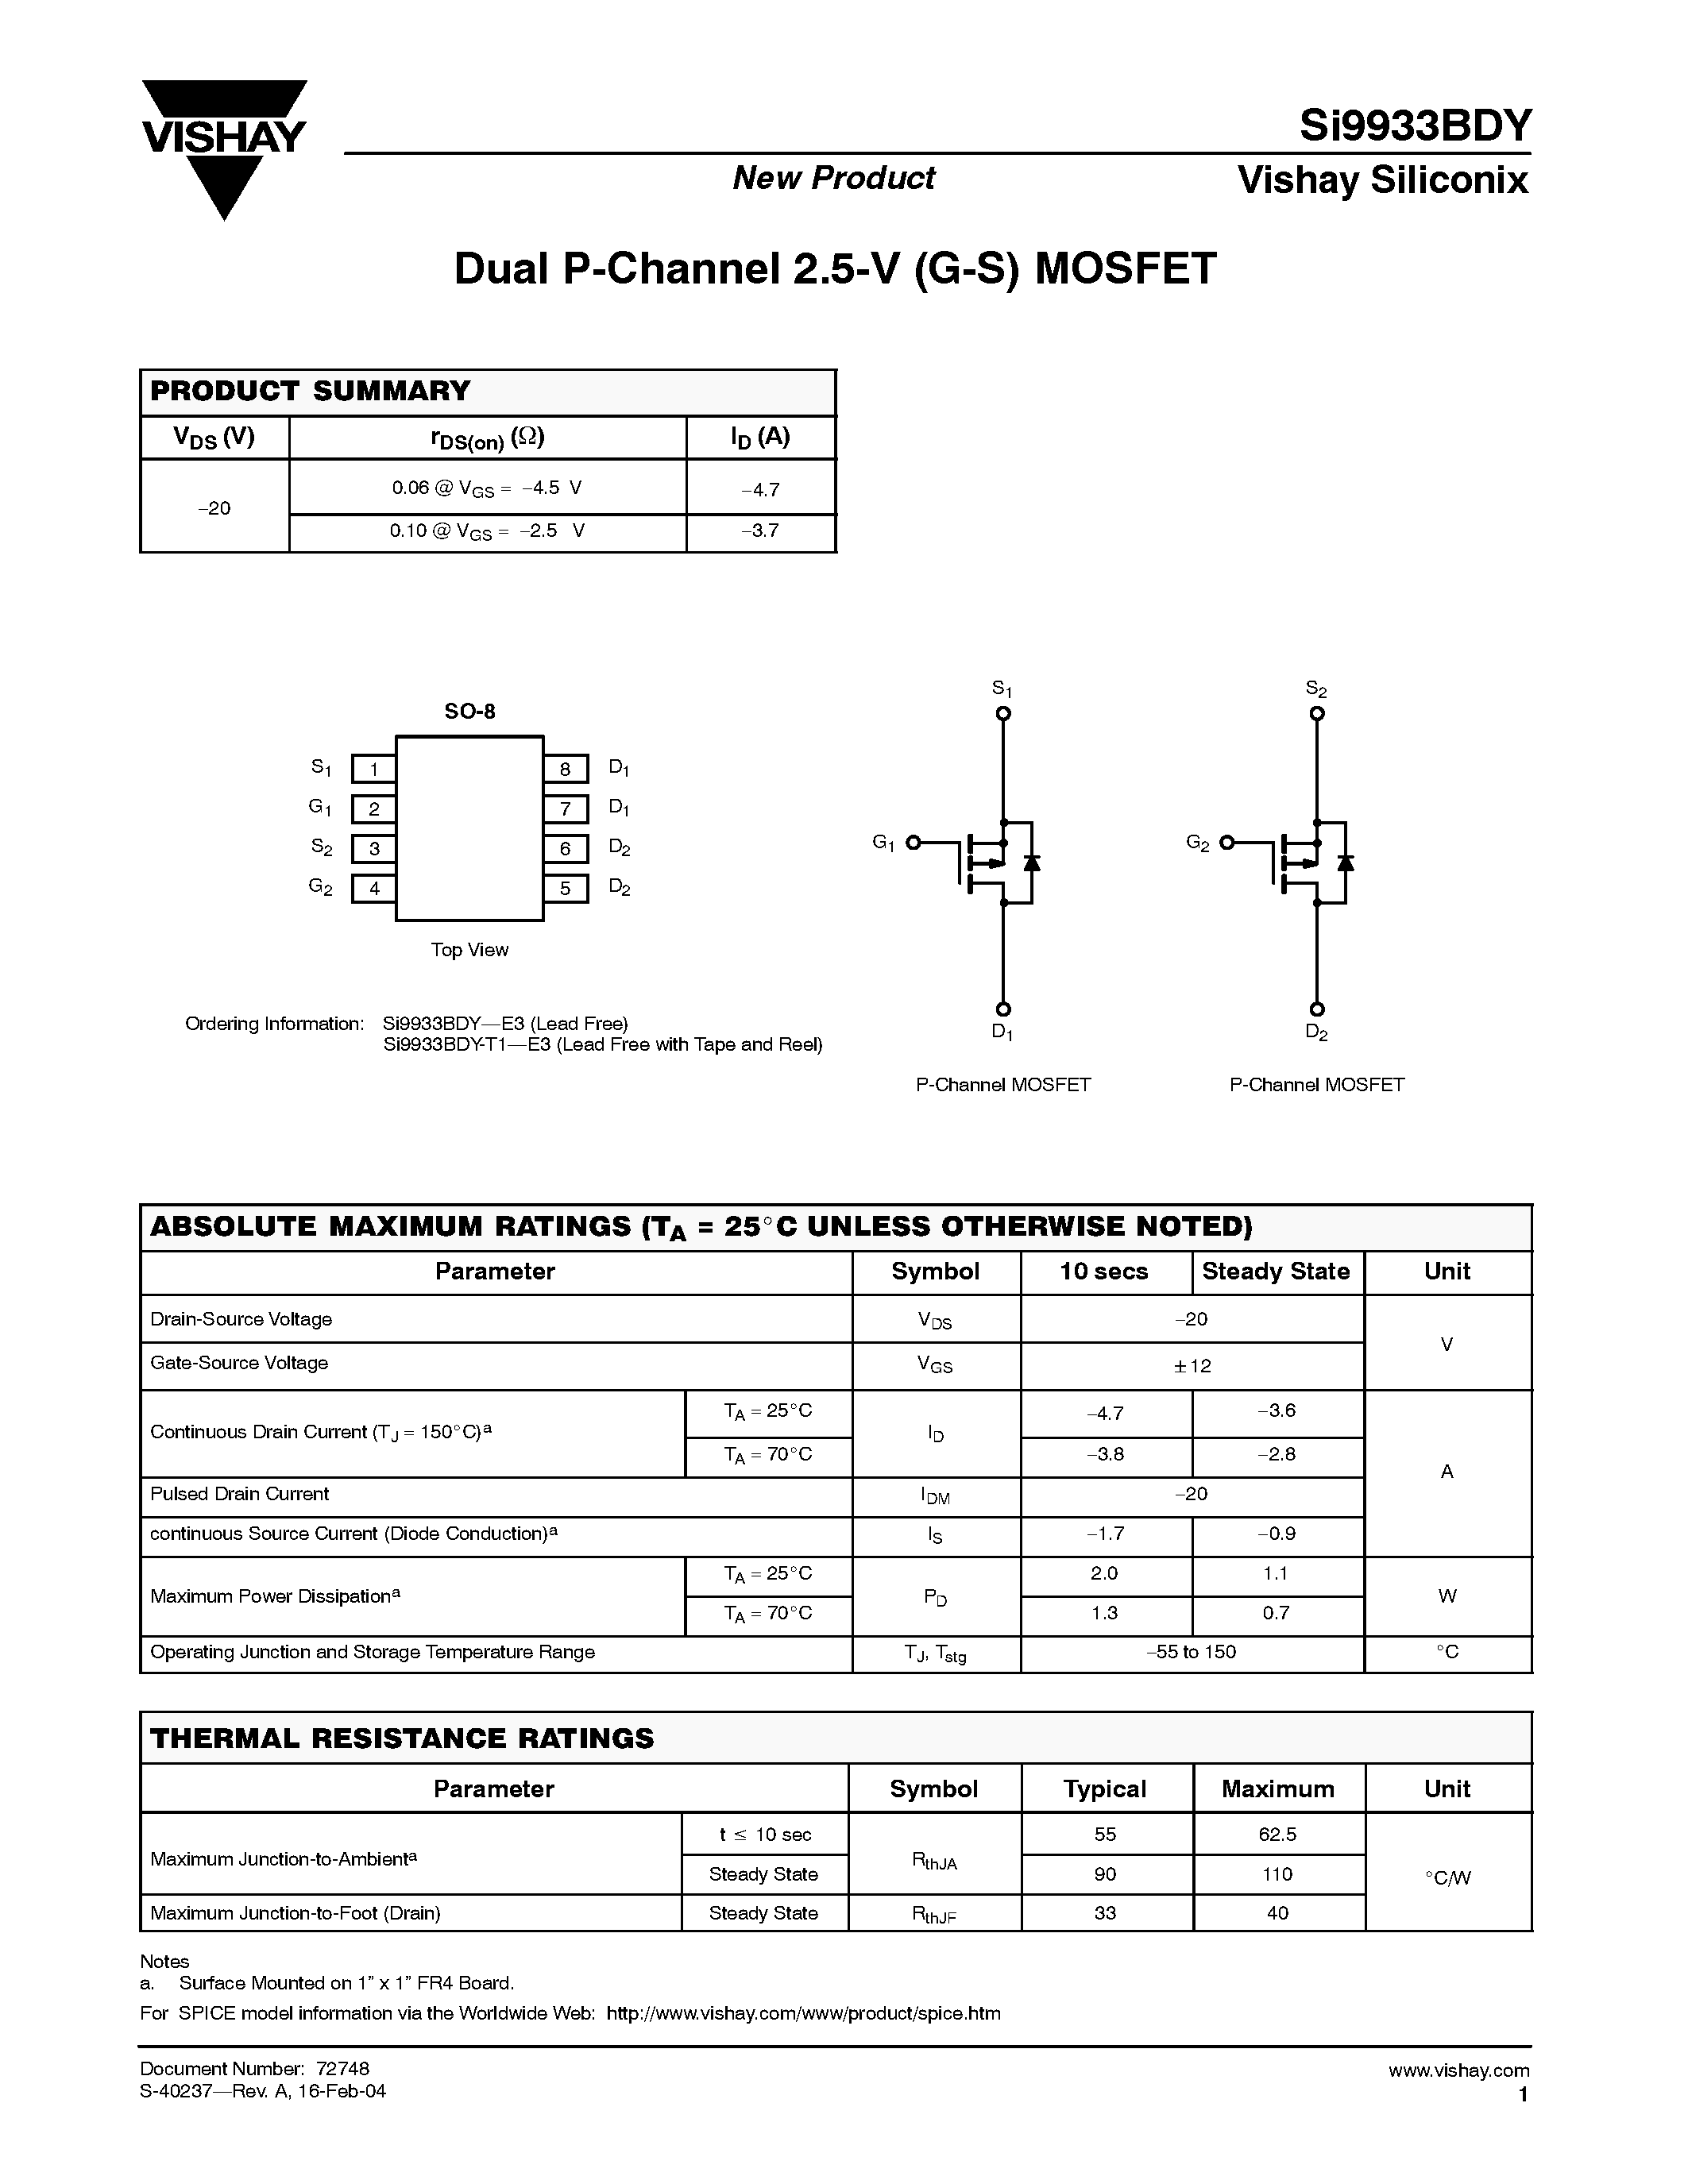 Даташит SI9933BDY - Dual P-Channel 2.5-V (G-S) MOSFET страница 1